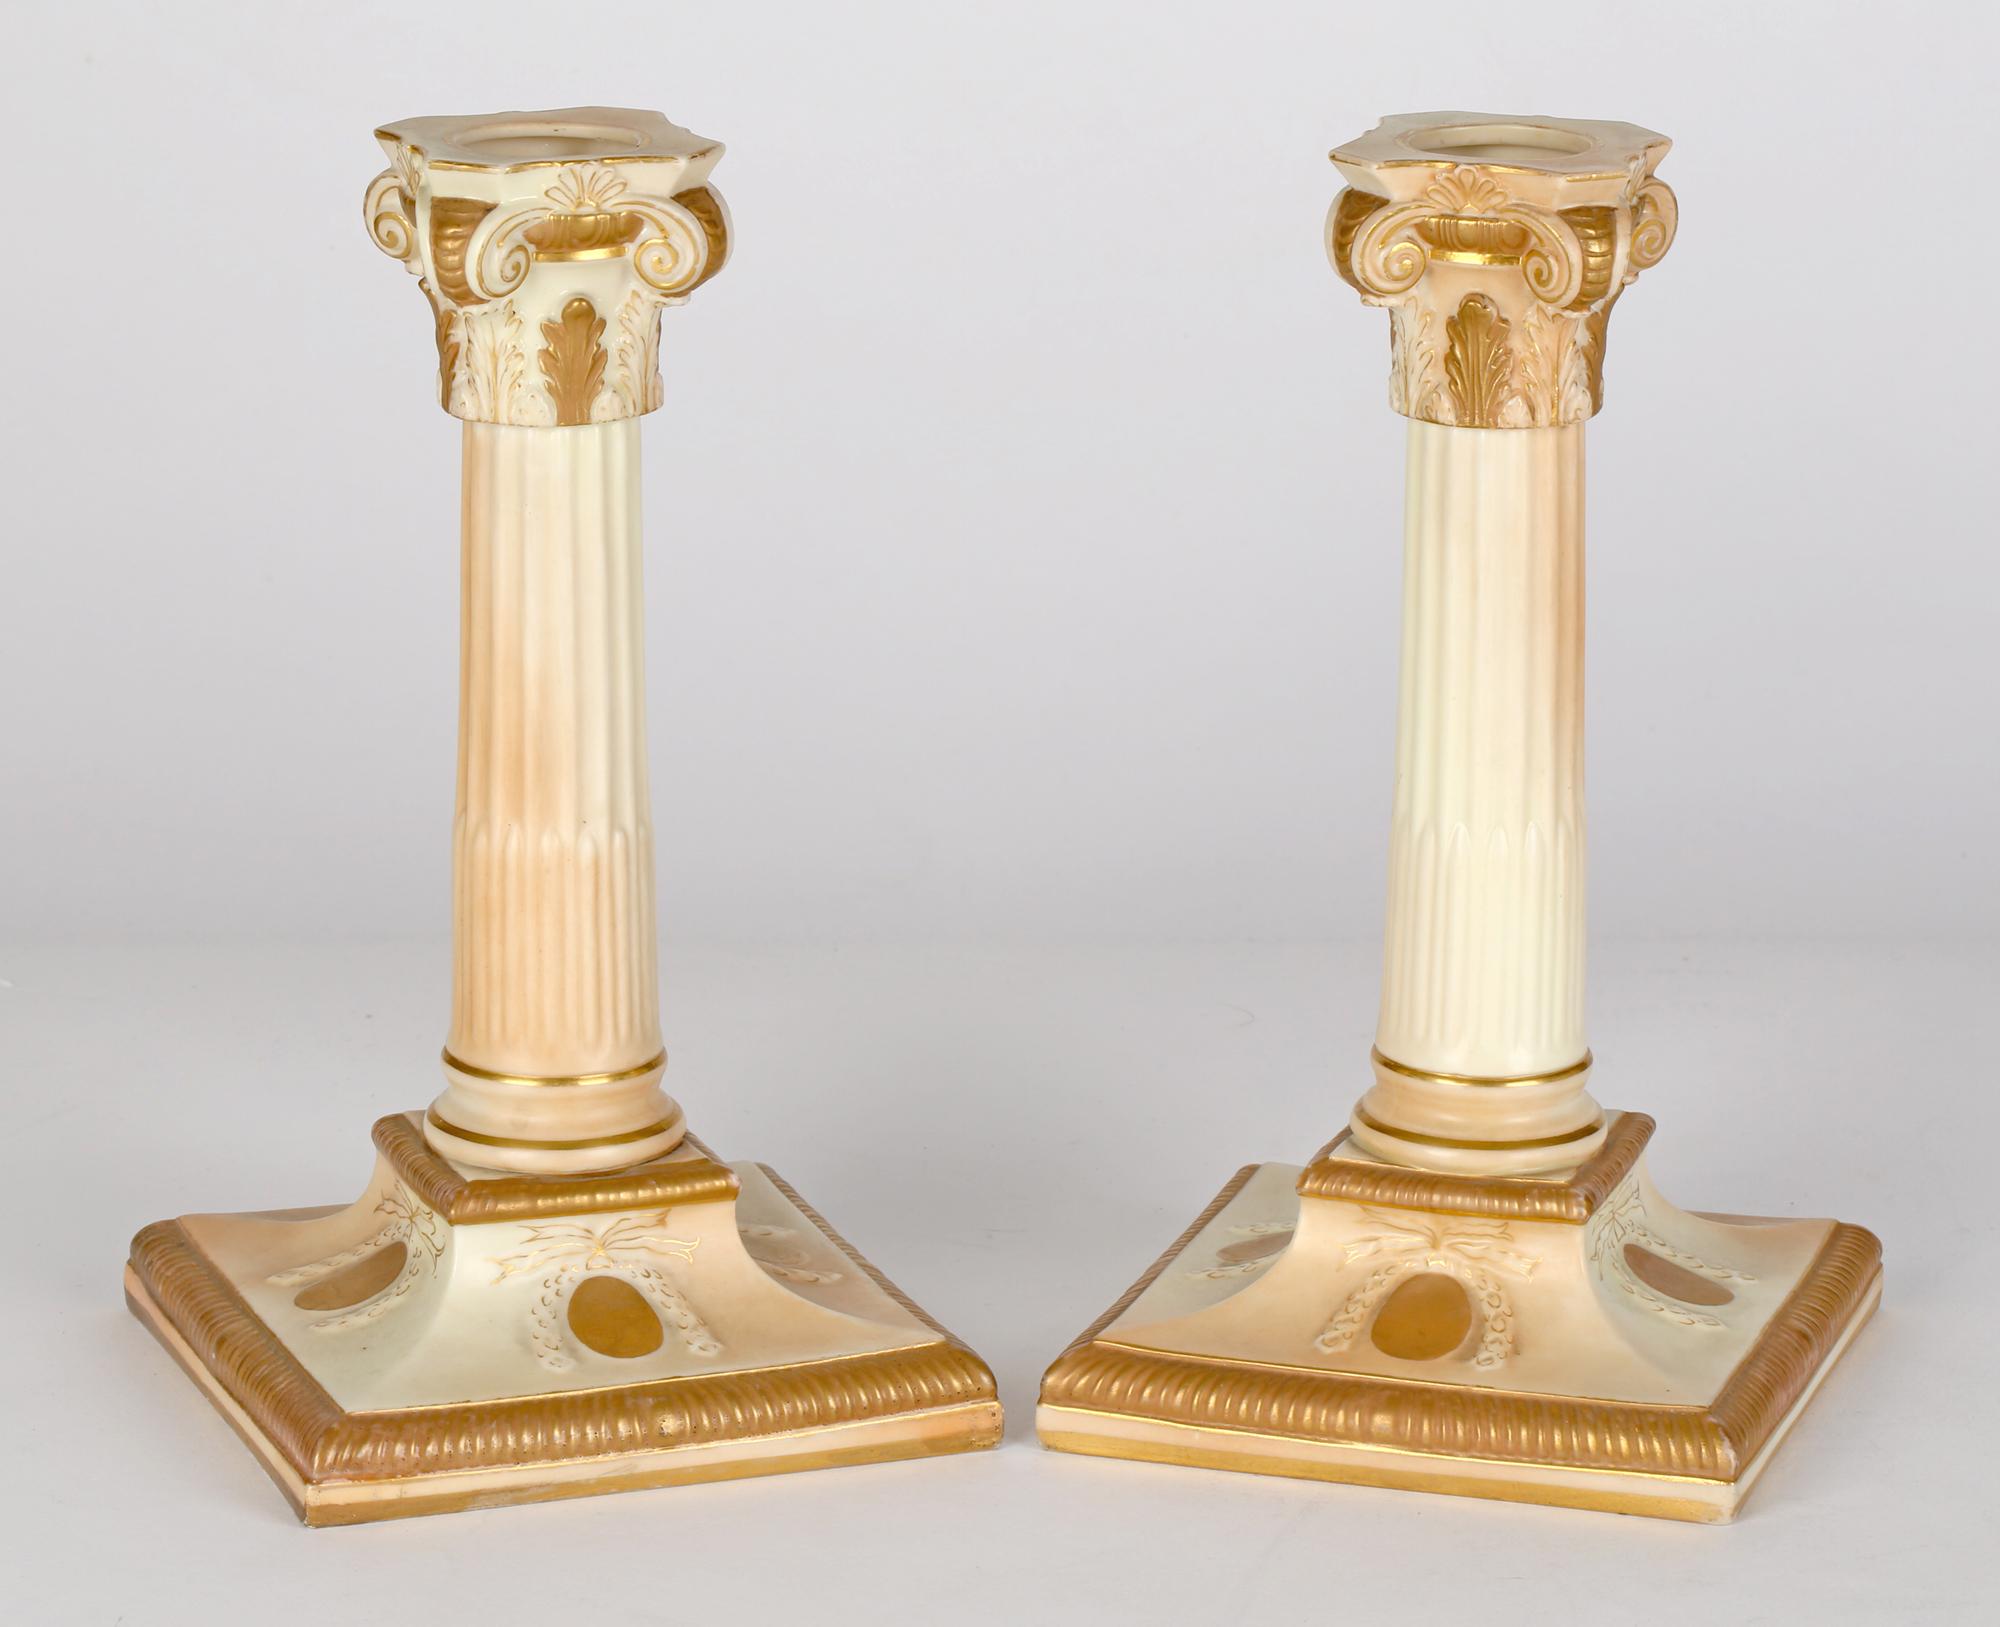 A very fine pair antique Royal Worcester classical porcelain column candlesticks decorated in blush ivory glazes dated 1892. The candlesticks stand raised on a square pedestal base with molded rounded tall columns with ornate leaf and scroll square